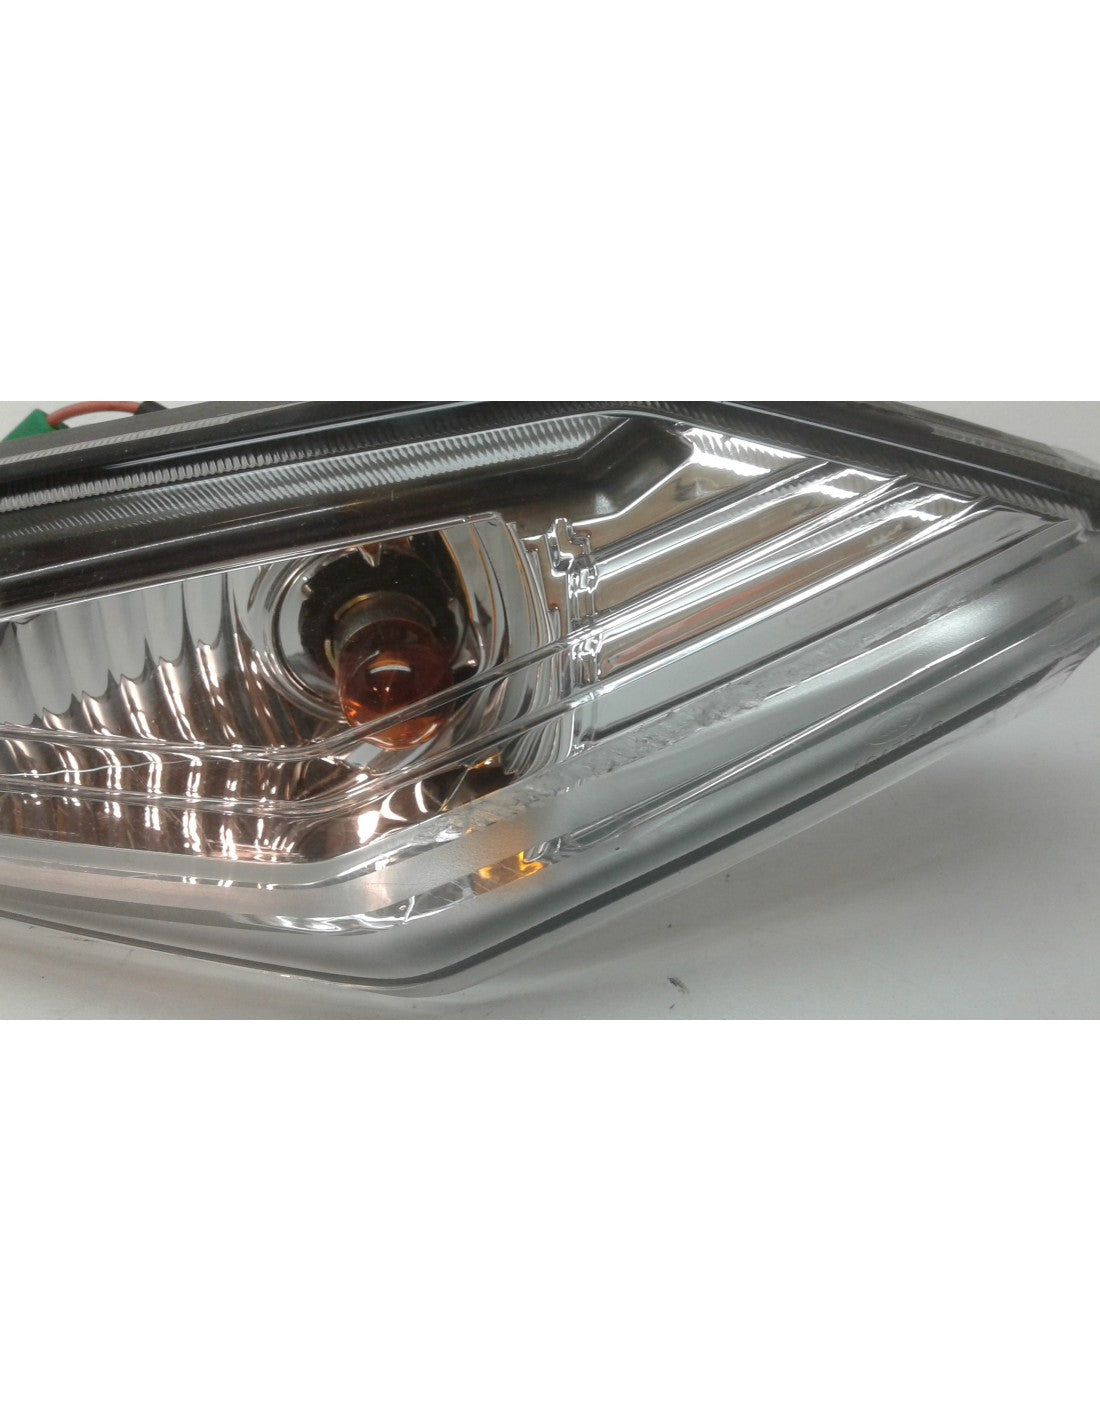 Left and right turn light front light for Sym Jet 14 co: 453820